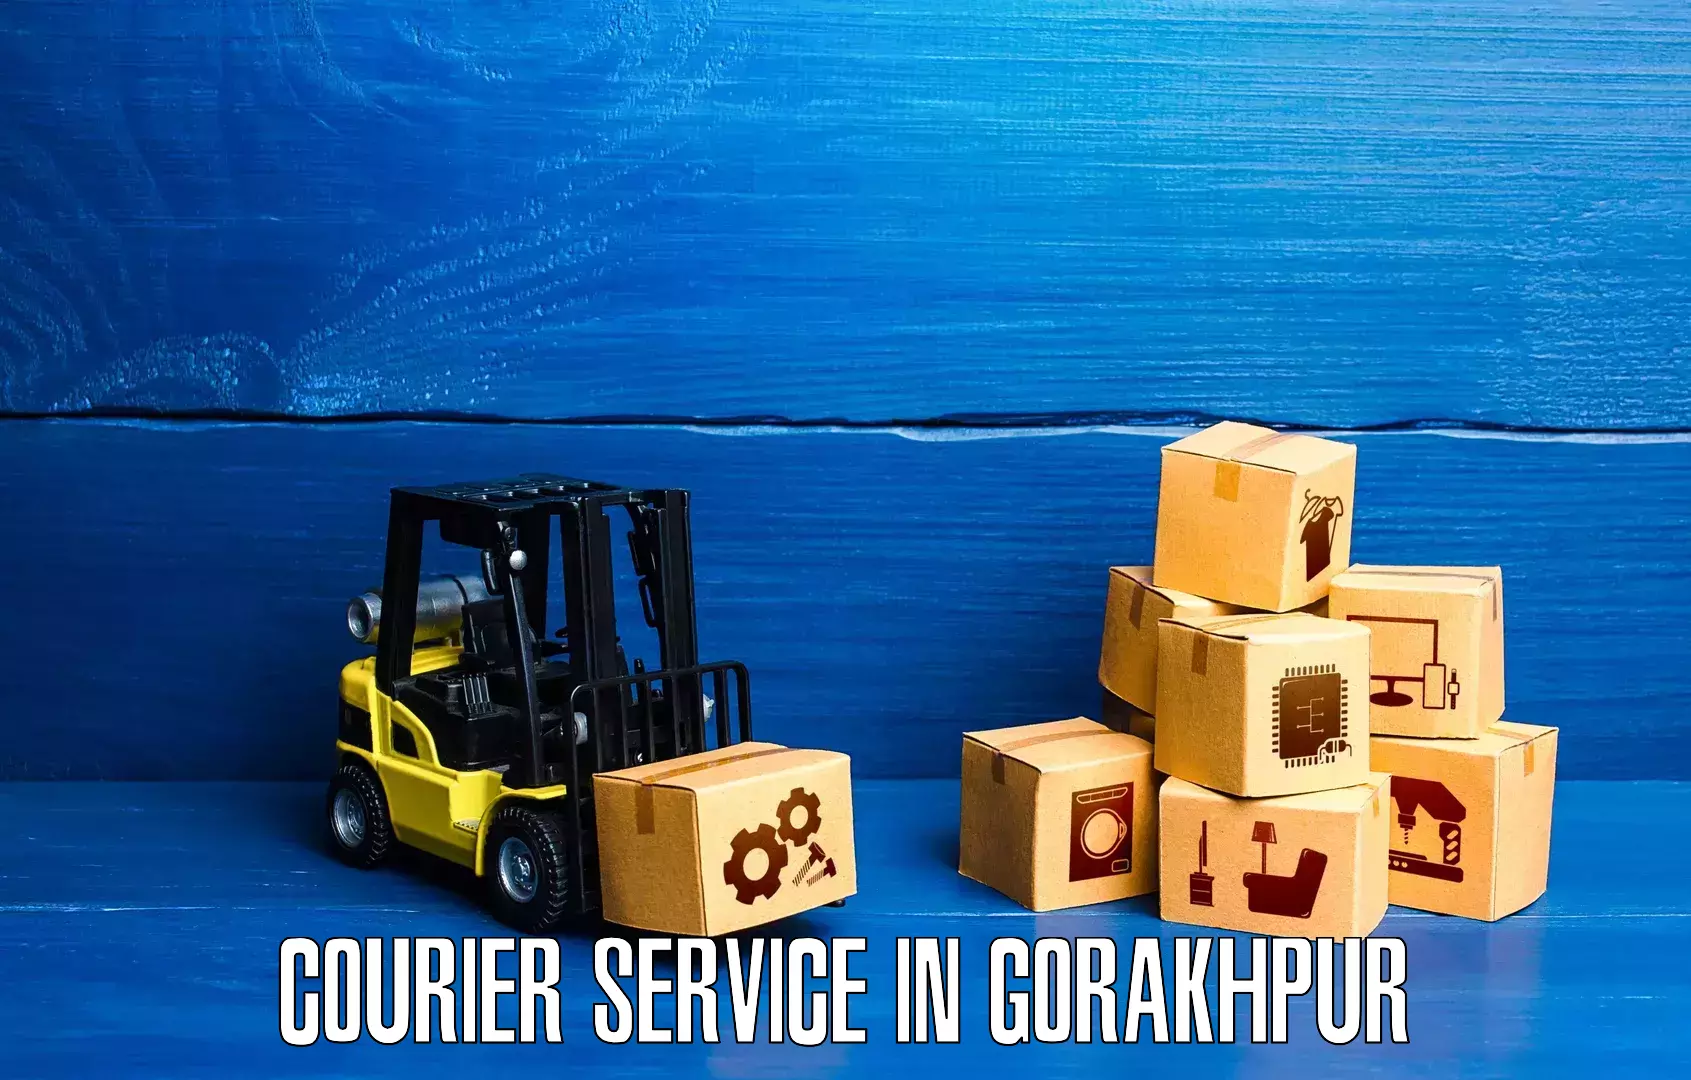 Tailored freight services in Gorakhpur